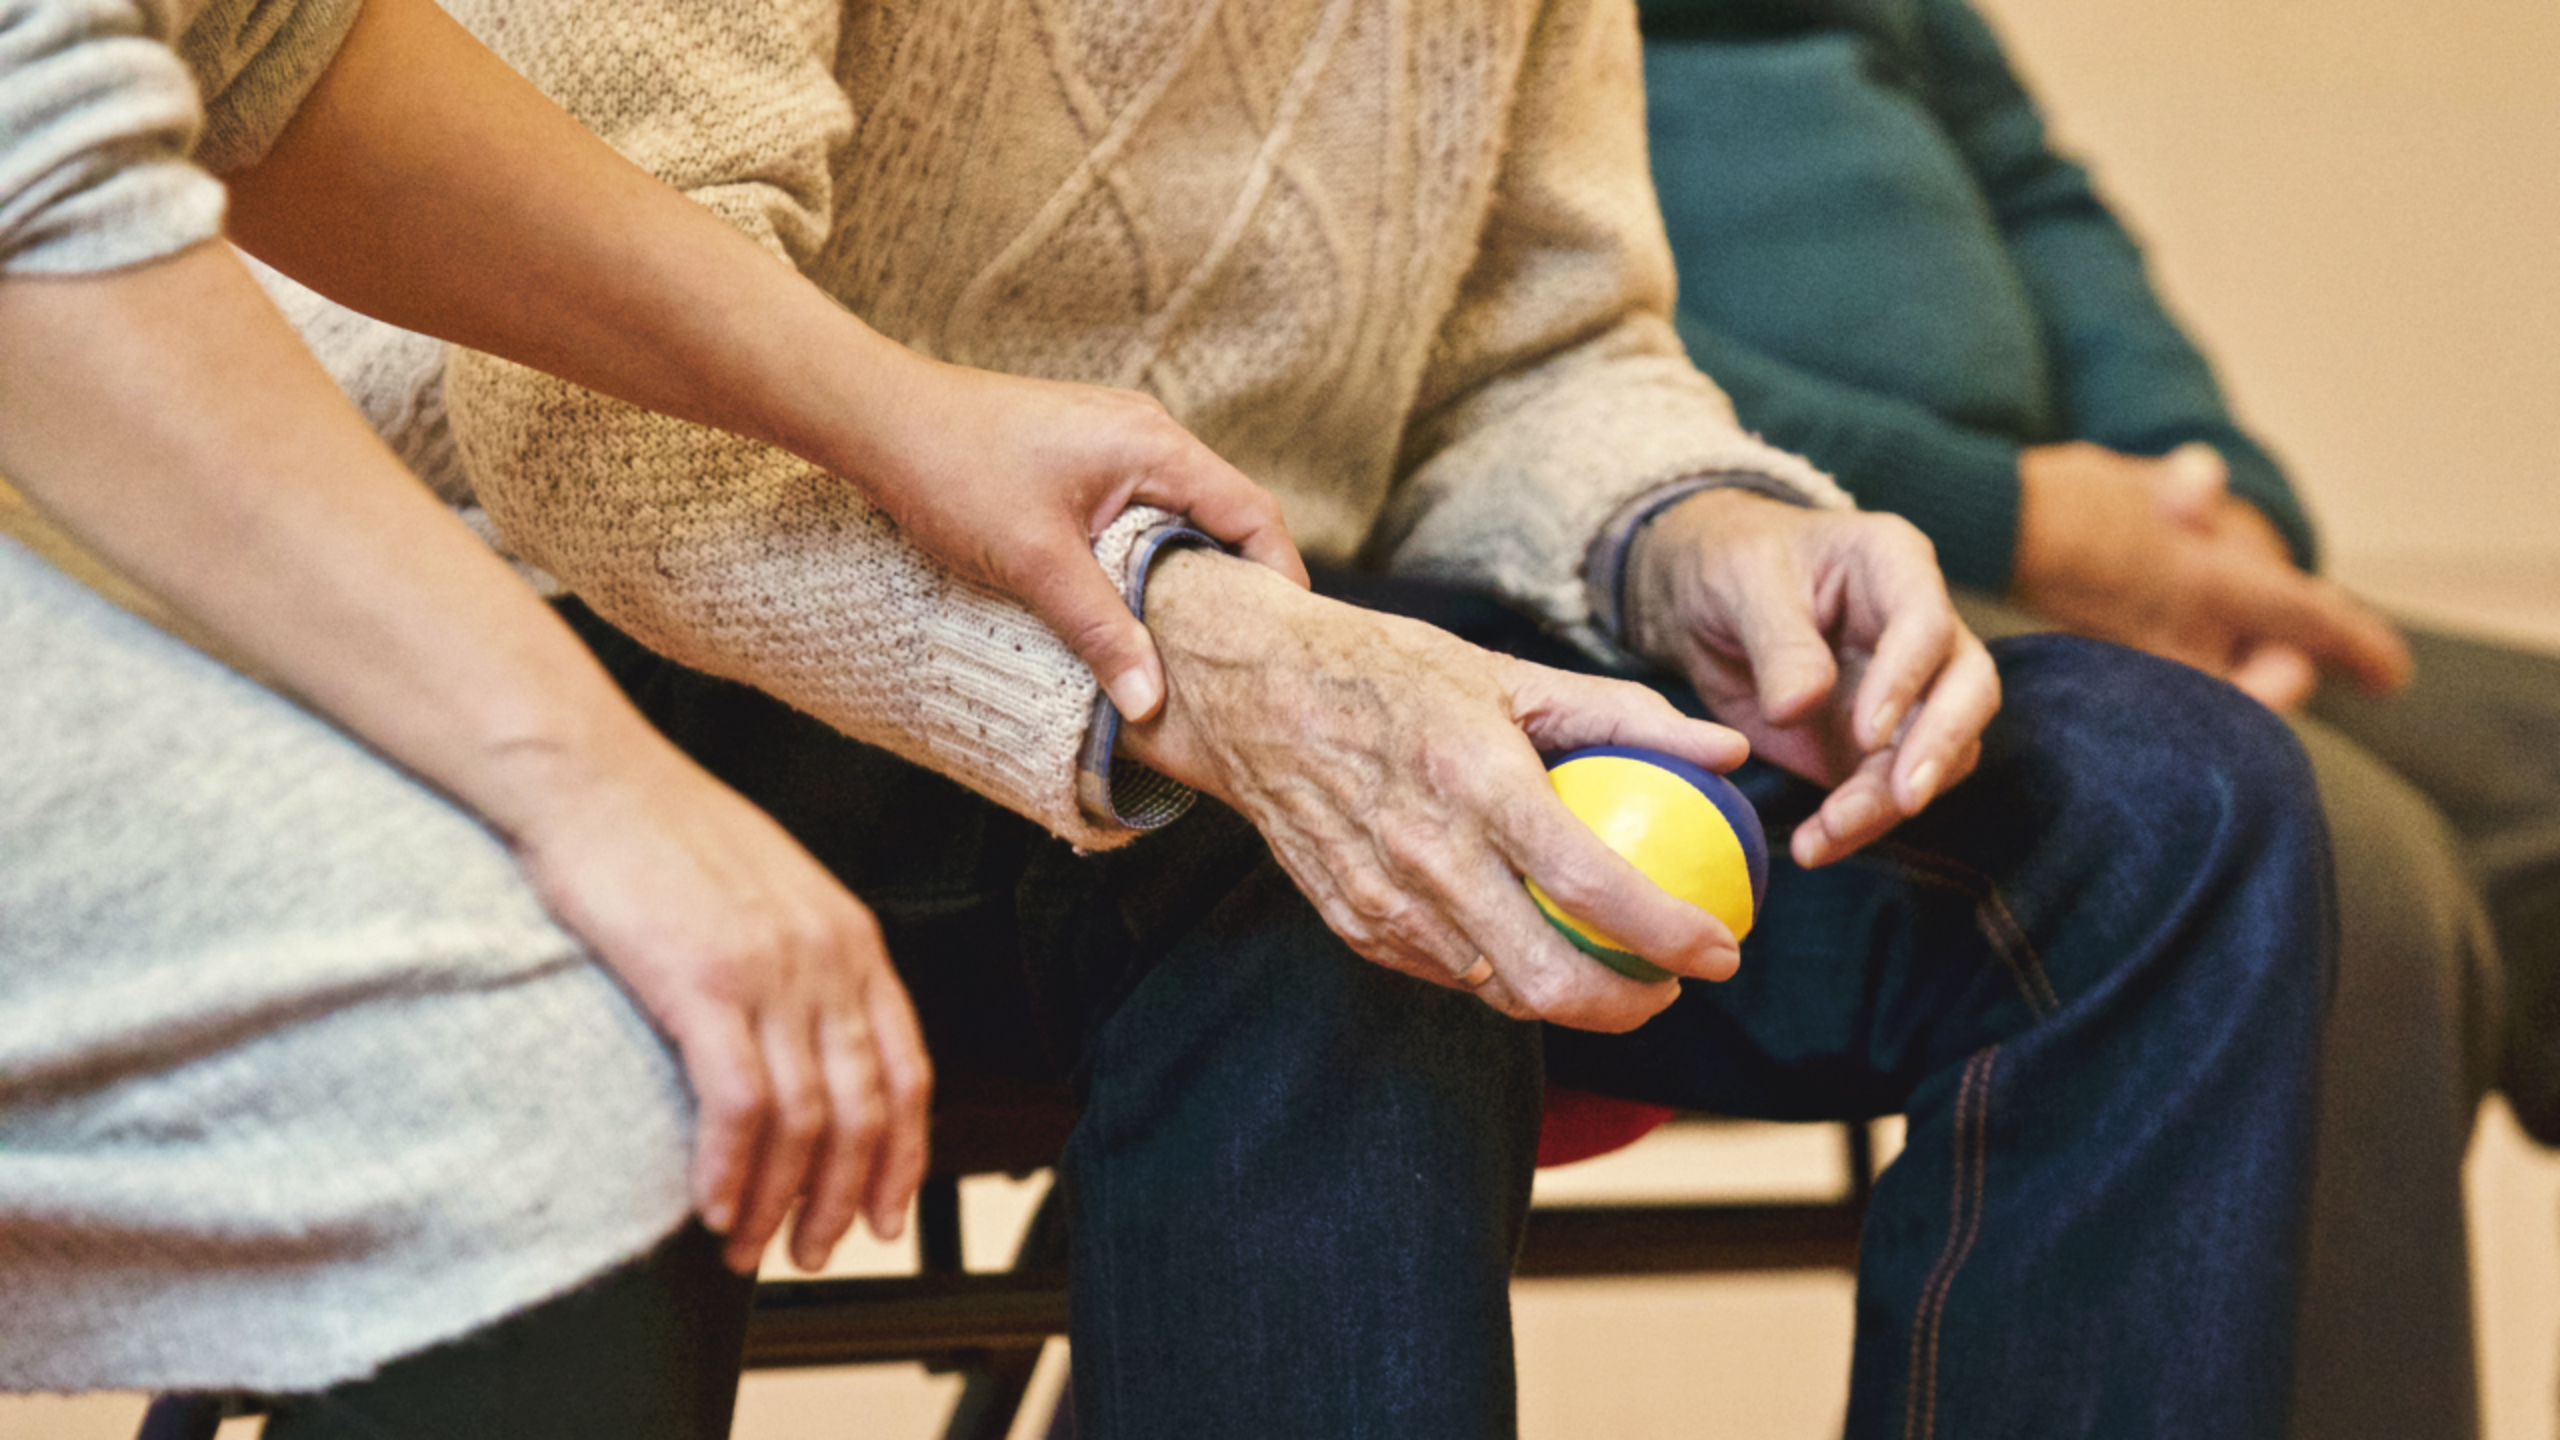 Those with arthritis may qualify for Social Security disability benefits. Learn how to qualify.